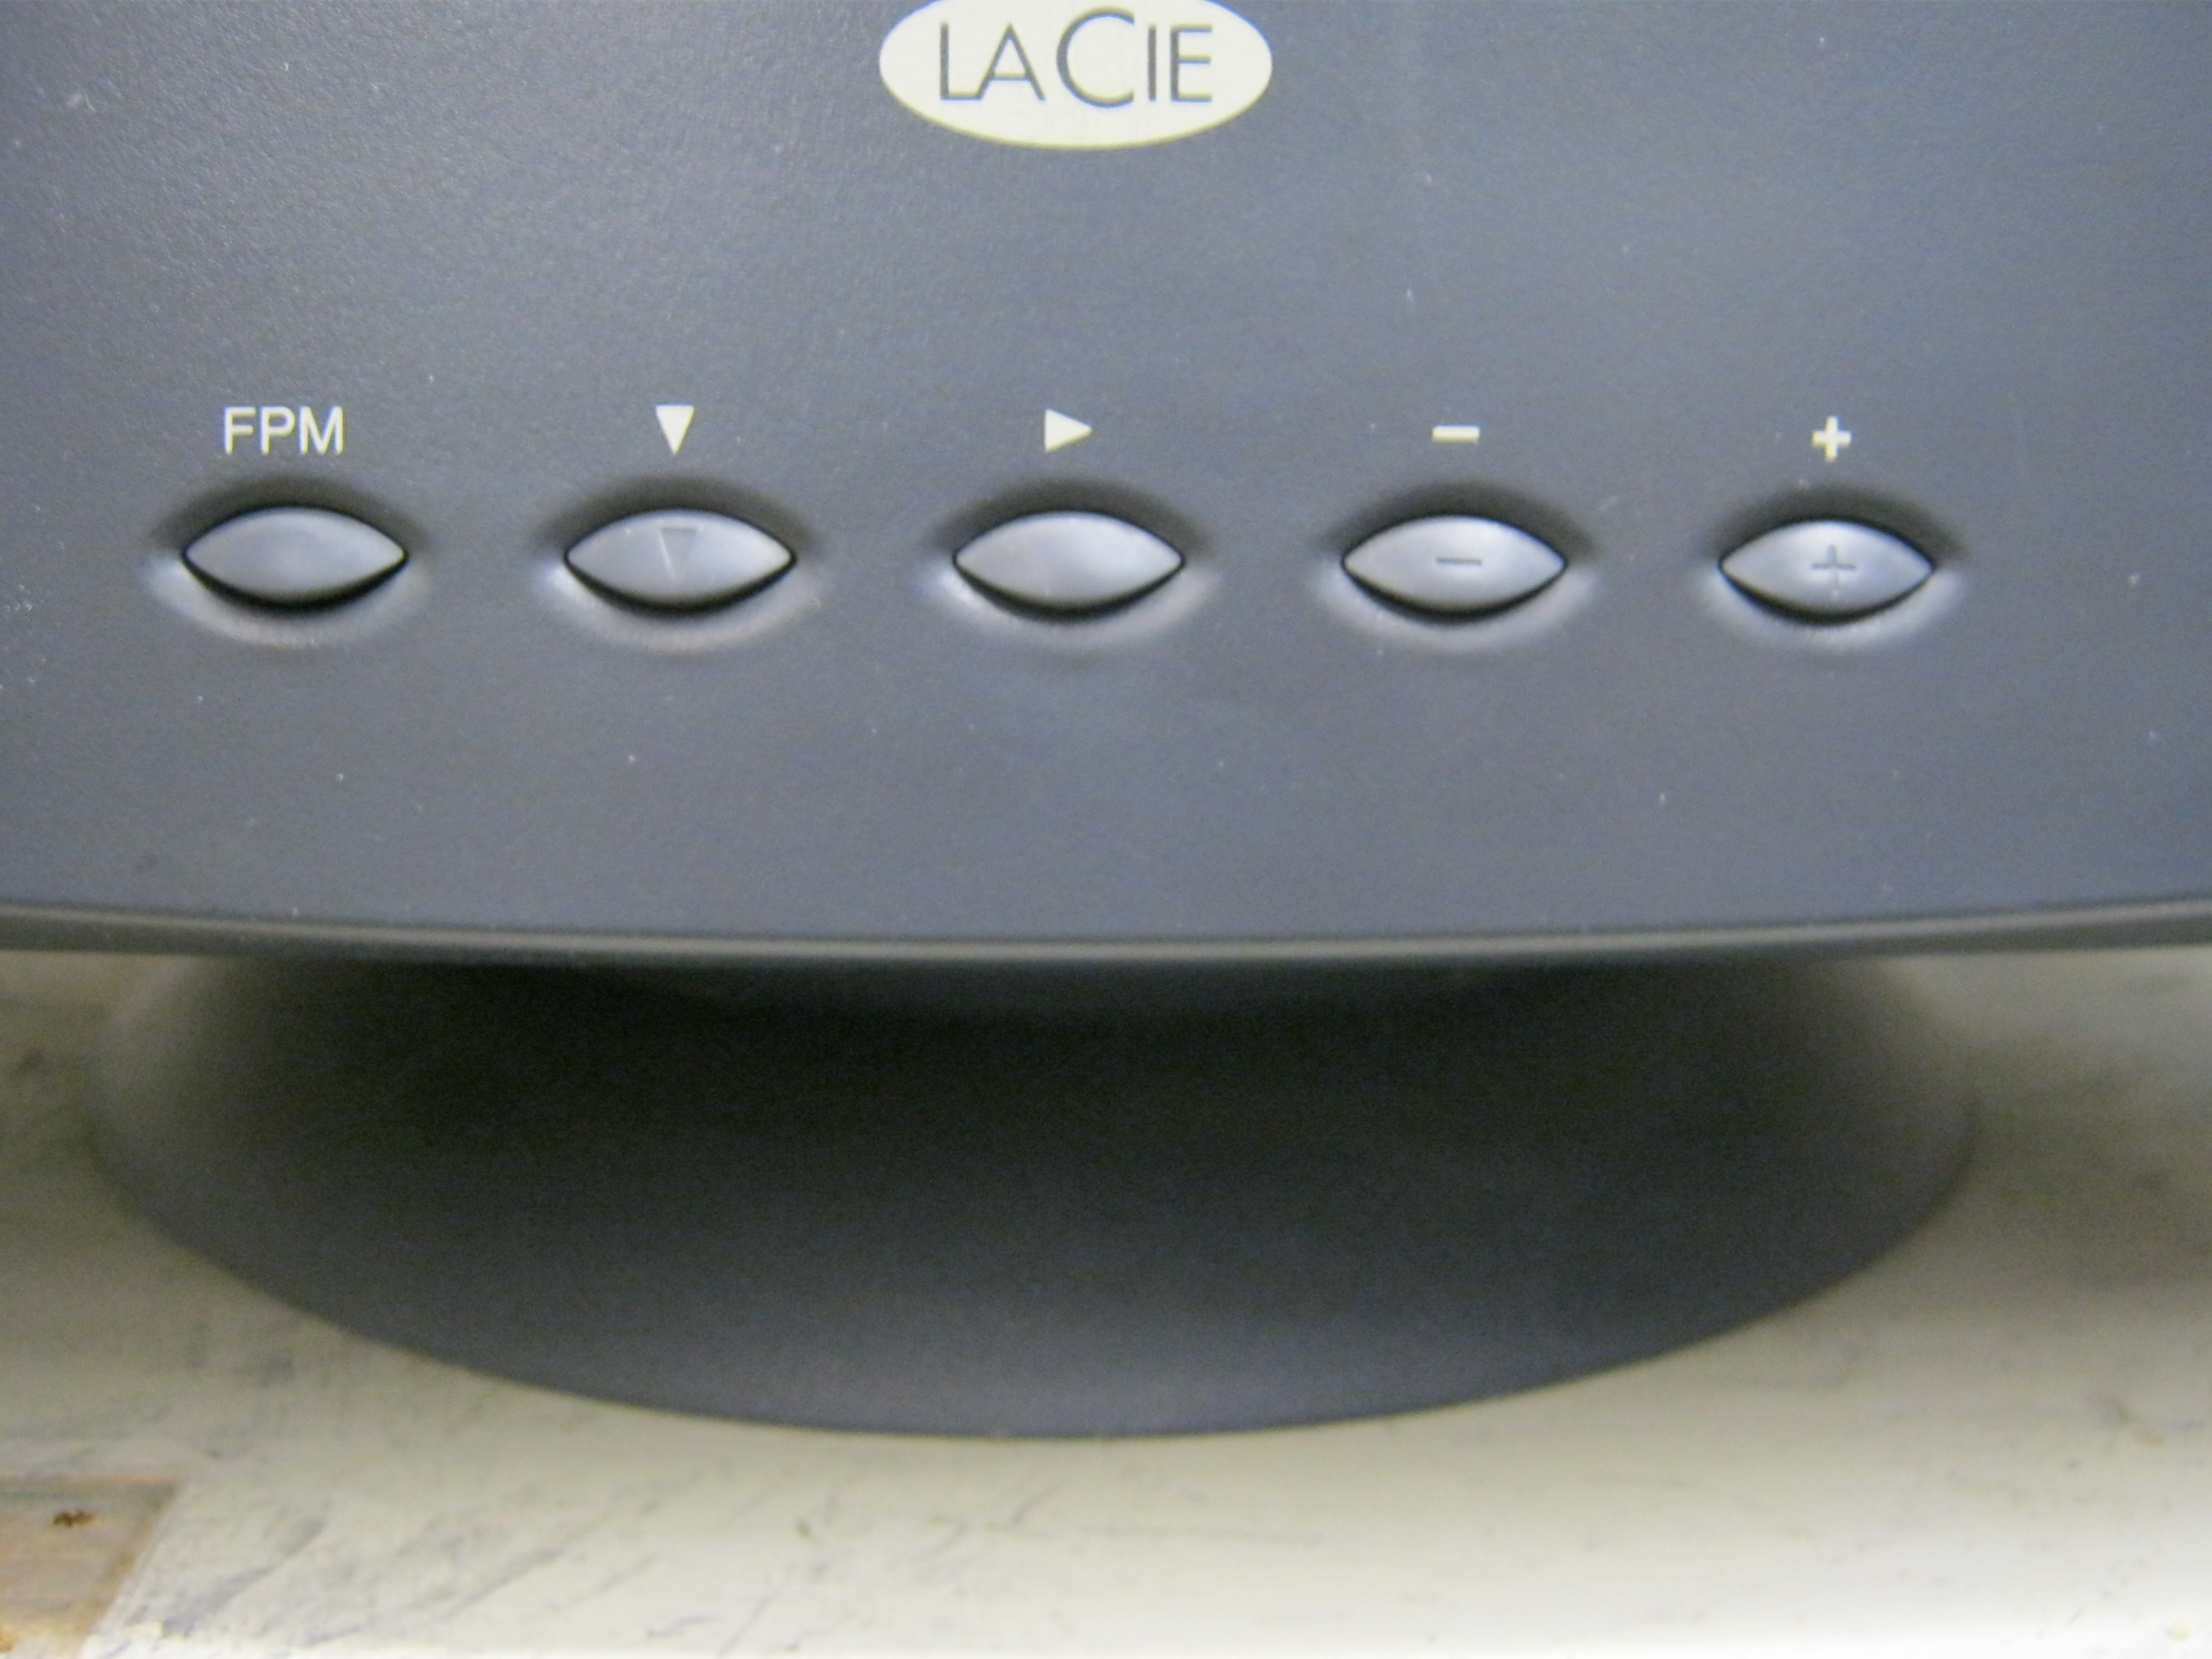 http://museodelcomputer.org/parts/l/lacie/electron19/IMG_1273.jpg